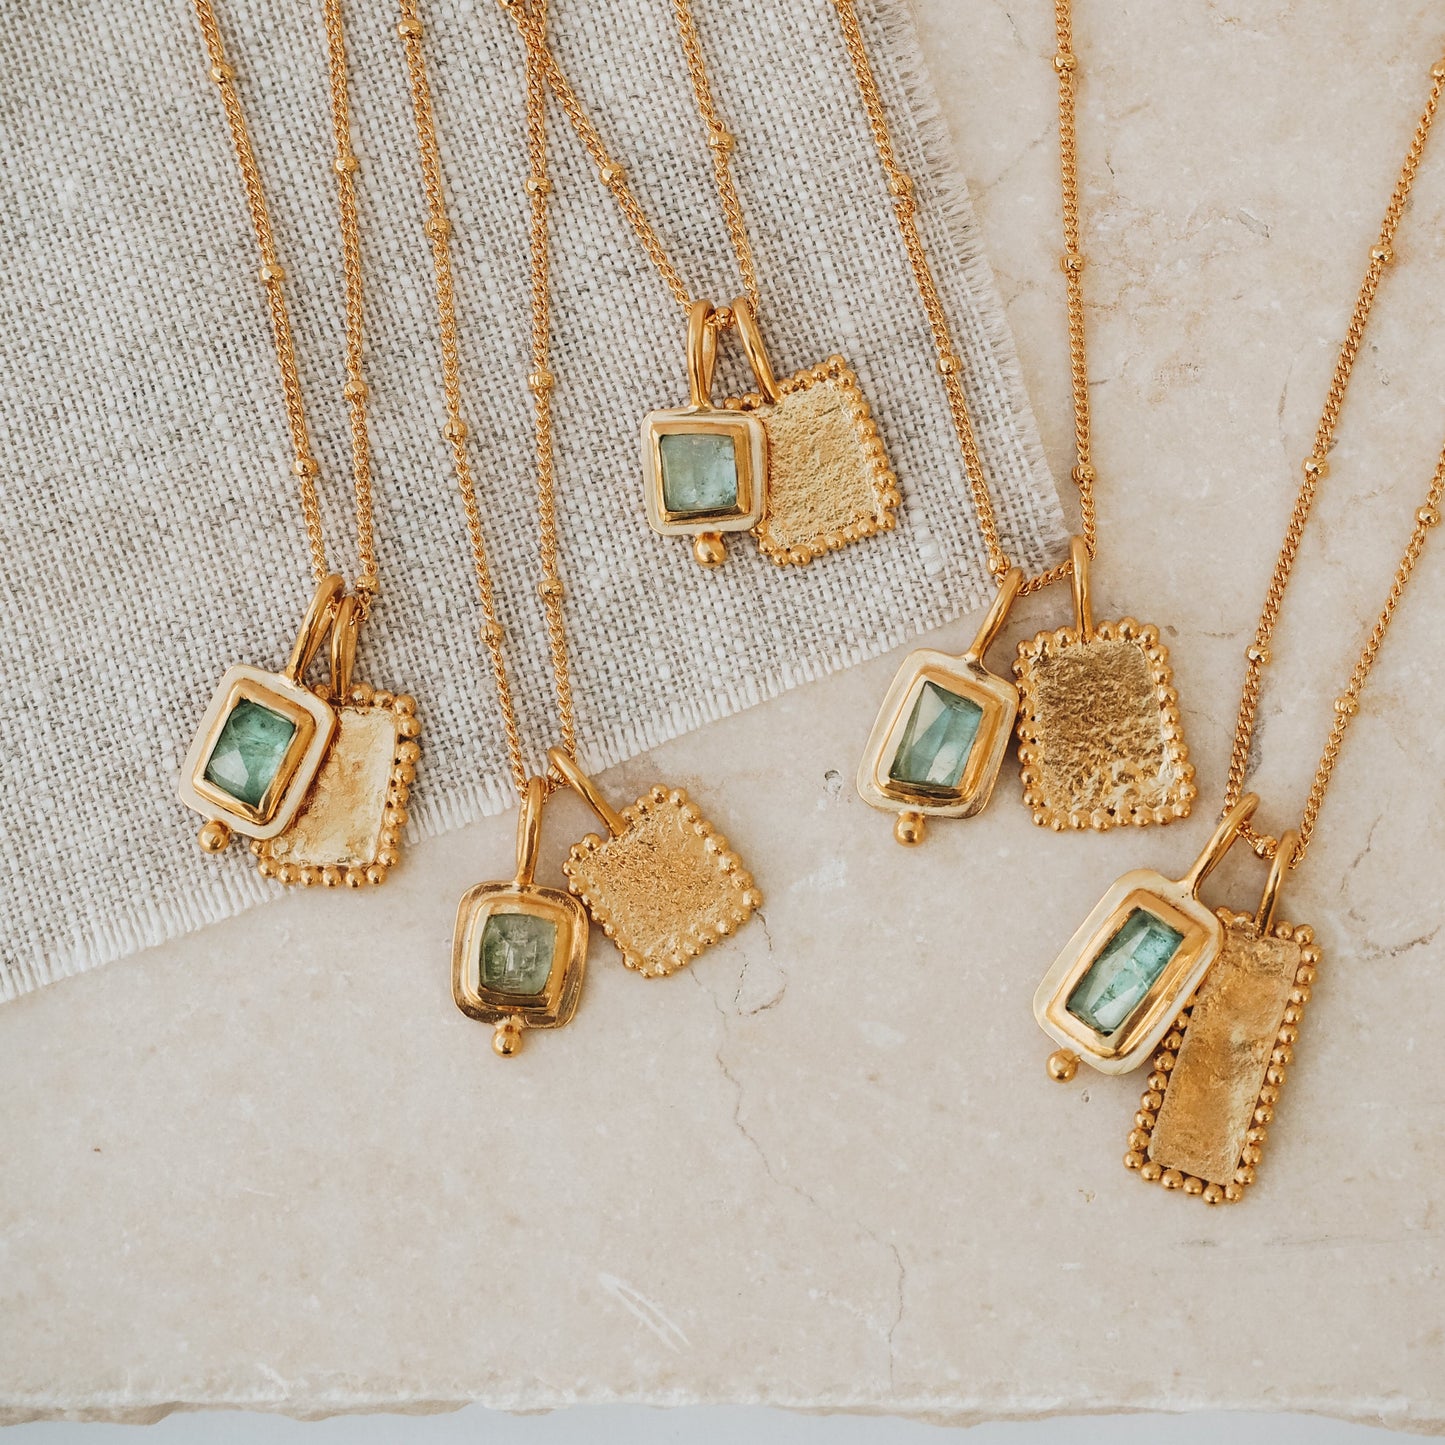 Collection of handcrafted rich gold necklaces with square pendants, adorned with ocean blue rose cut tourmaline gemstones, textured surfaces, and intricate granulation detailing.